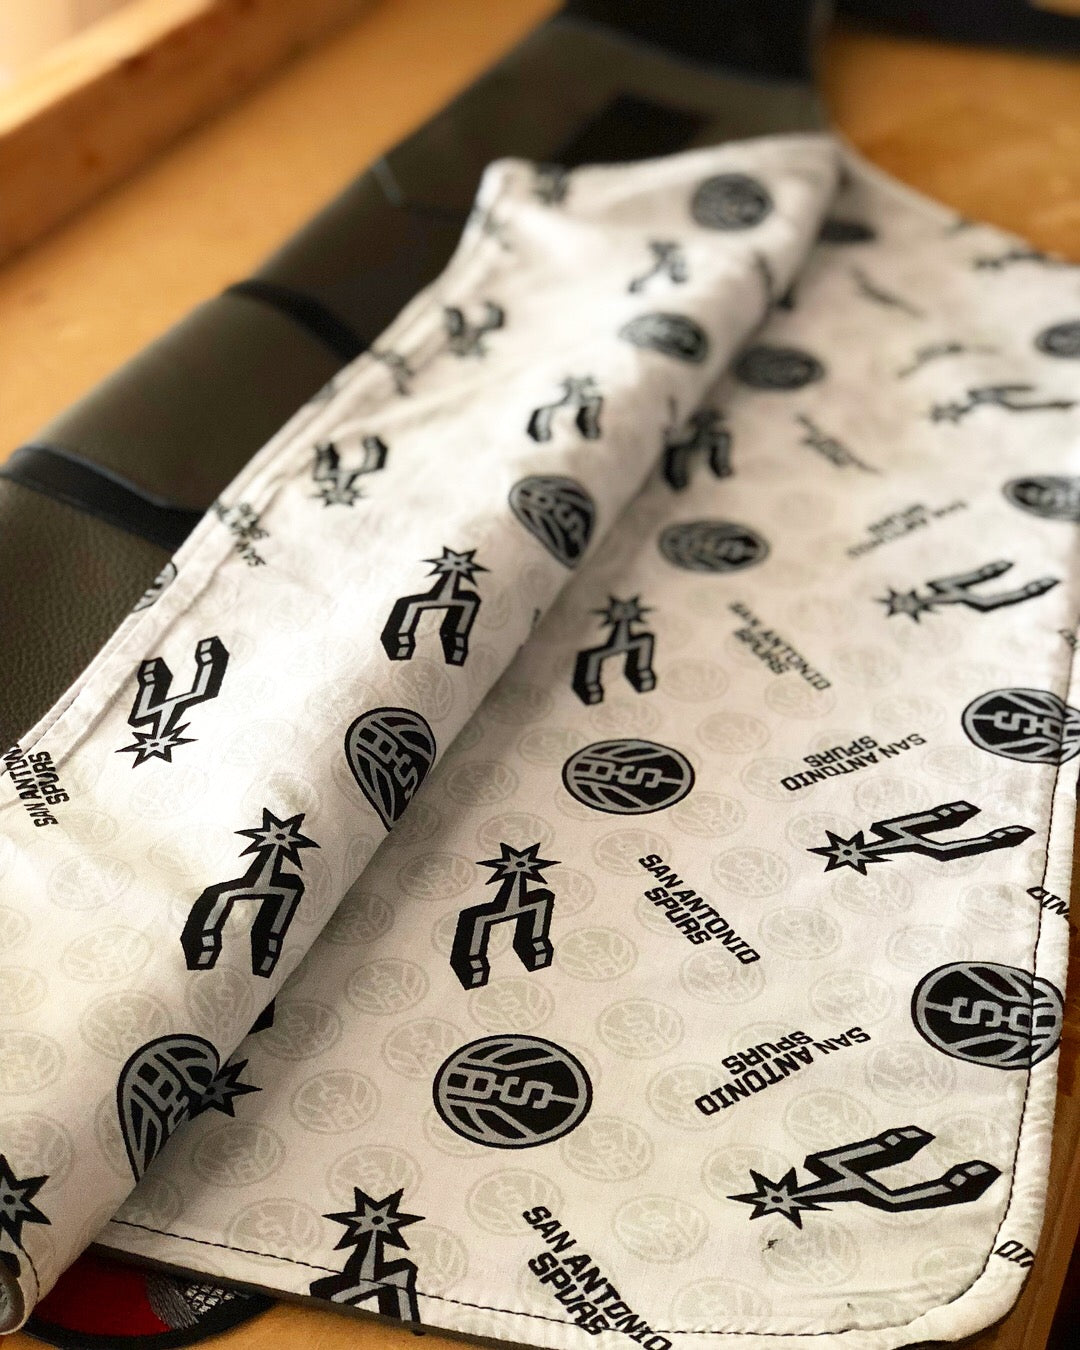 New Spurs Nation leather aprons are now available